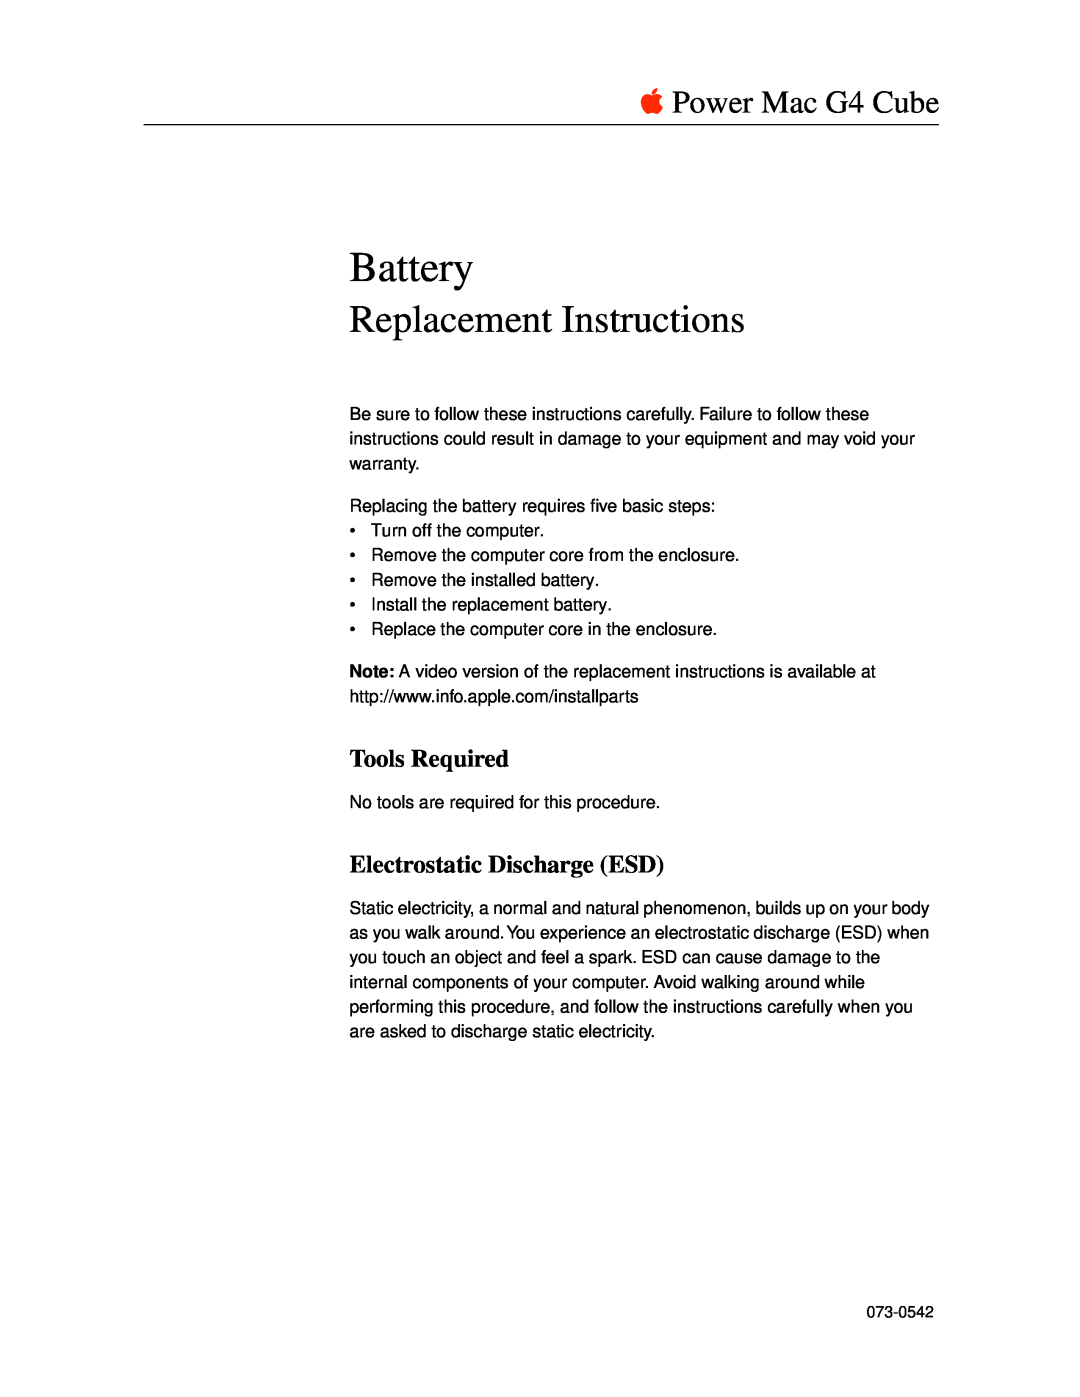 Apple 073-0542 warranty Tools Required, Electrostatic Discharge ESD, Battery, Replacement Instructions 